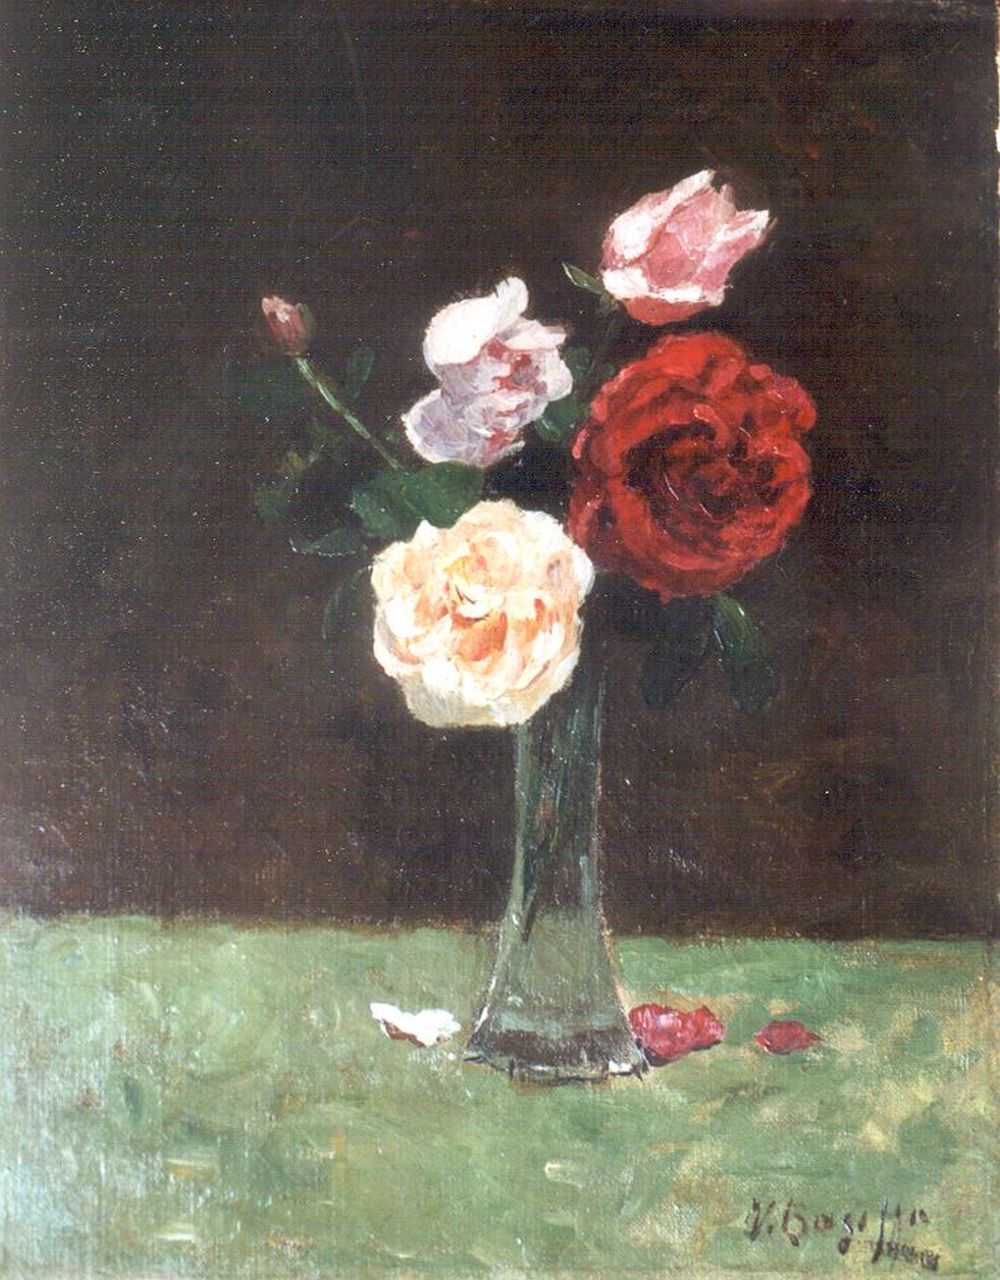 Bauffe V.  | Victor Bauffe, Roses in a glass vase, oil on canvas 38.3 x 30.3 cm, signed l.r.